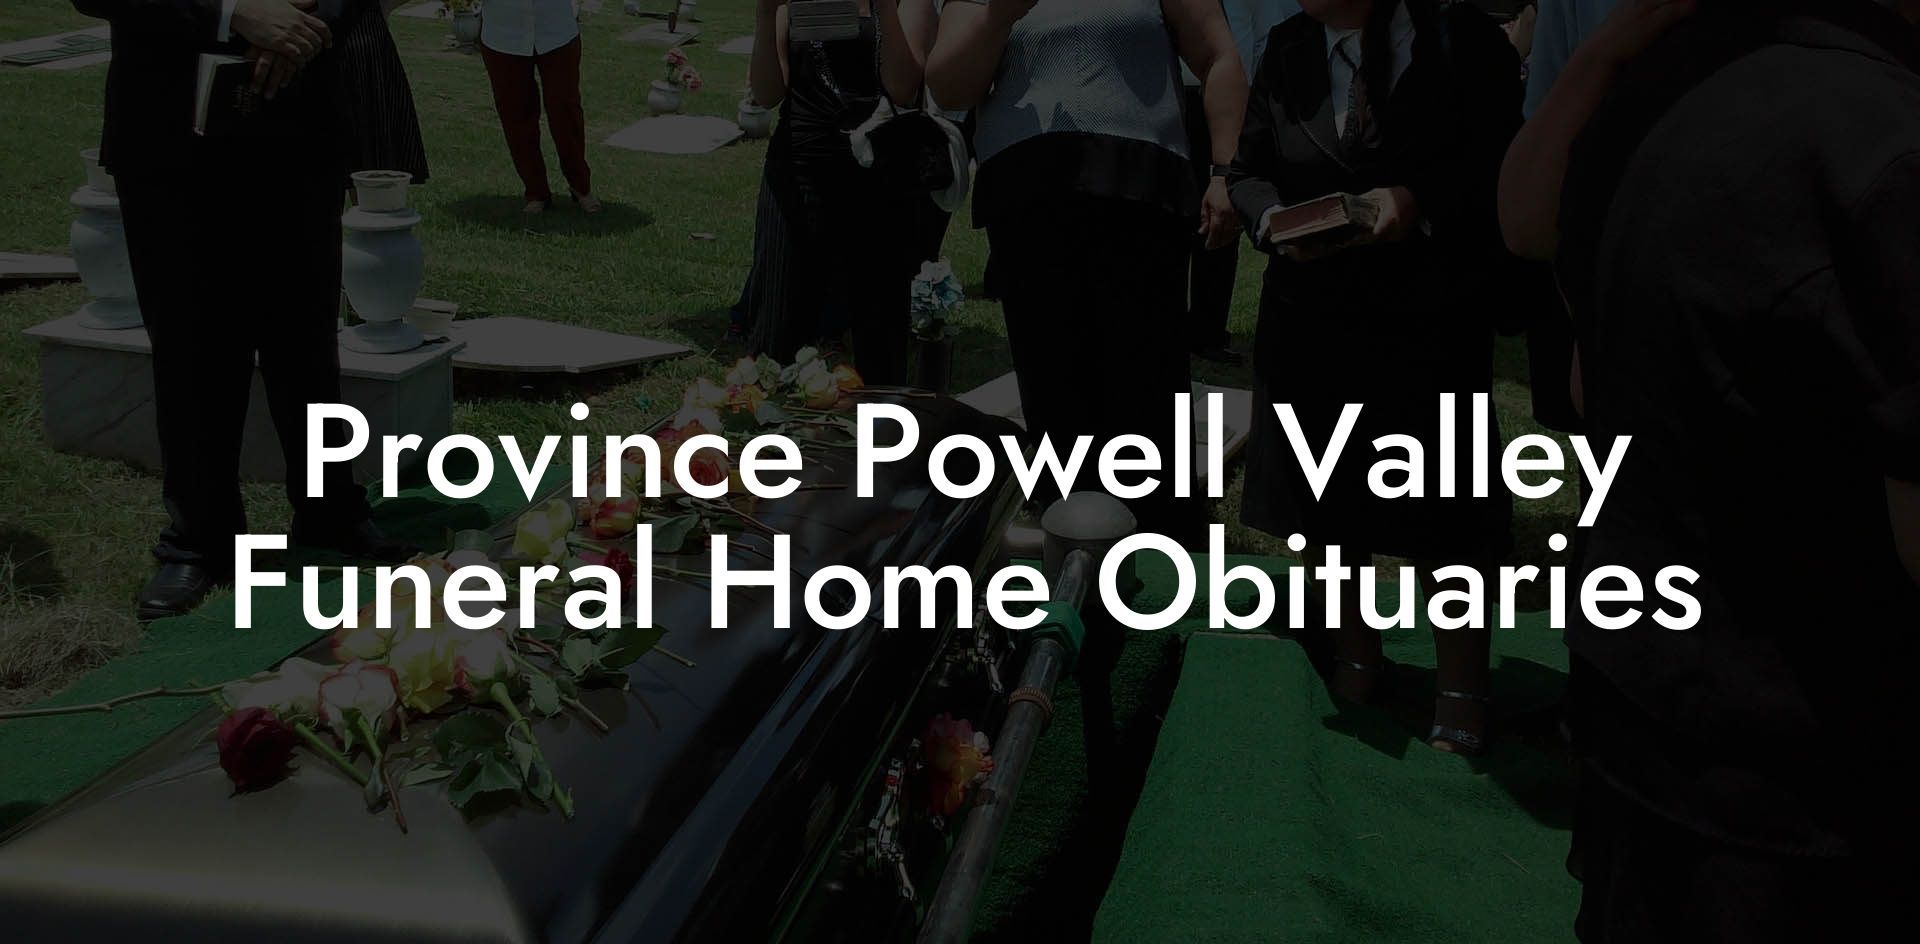 Province Powell Valley Funeral Home Obituaries